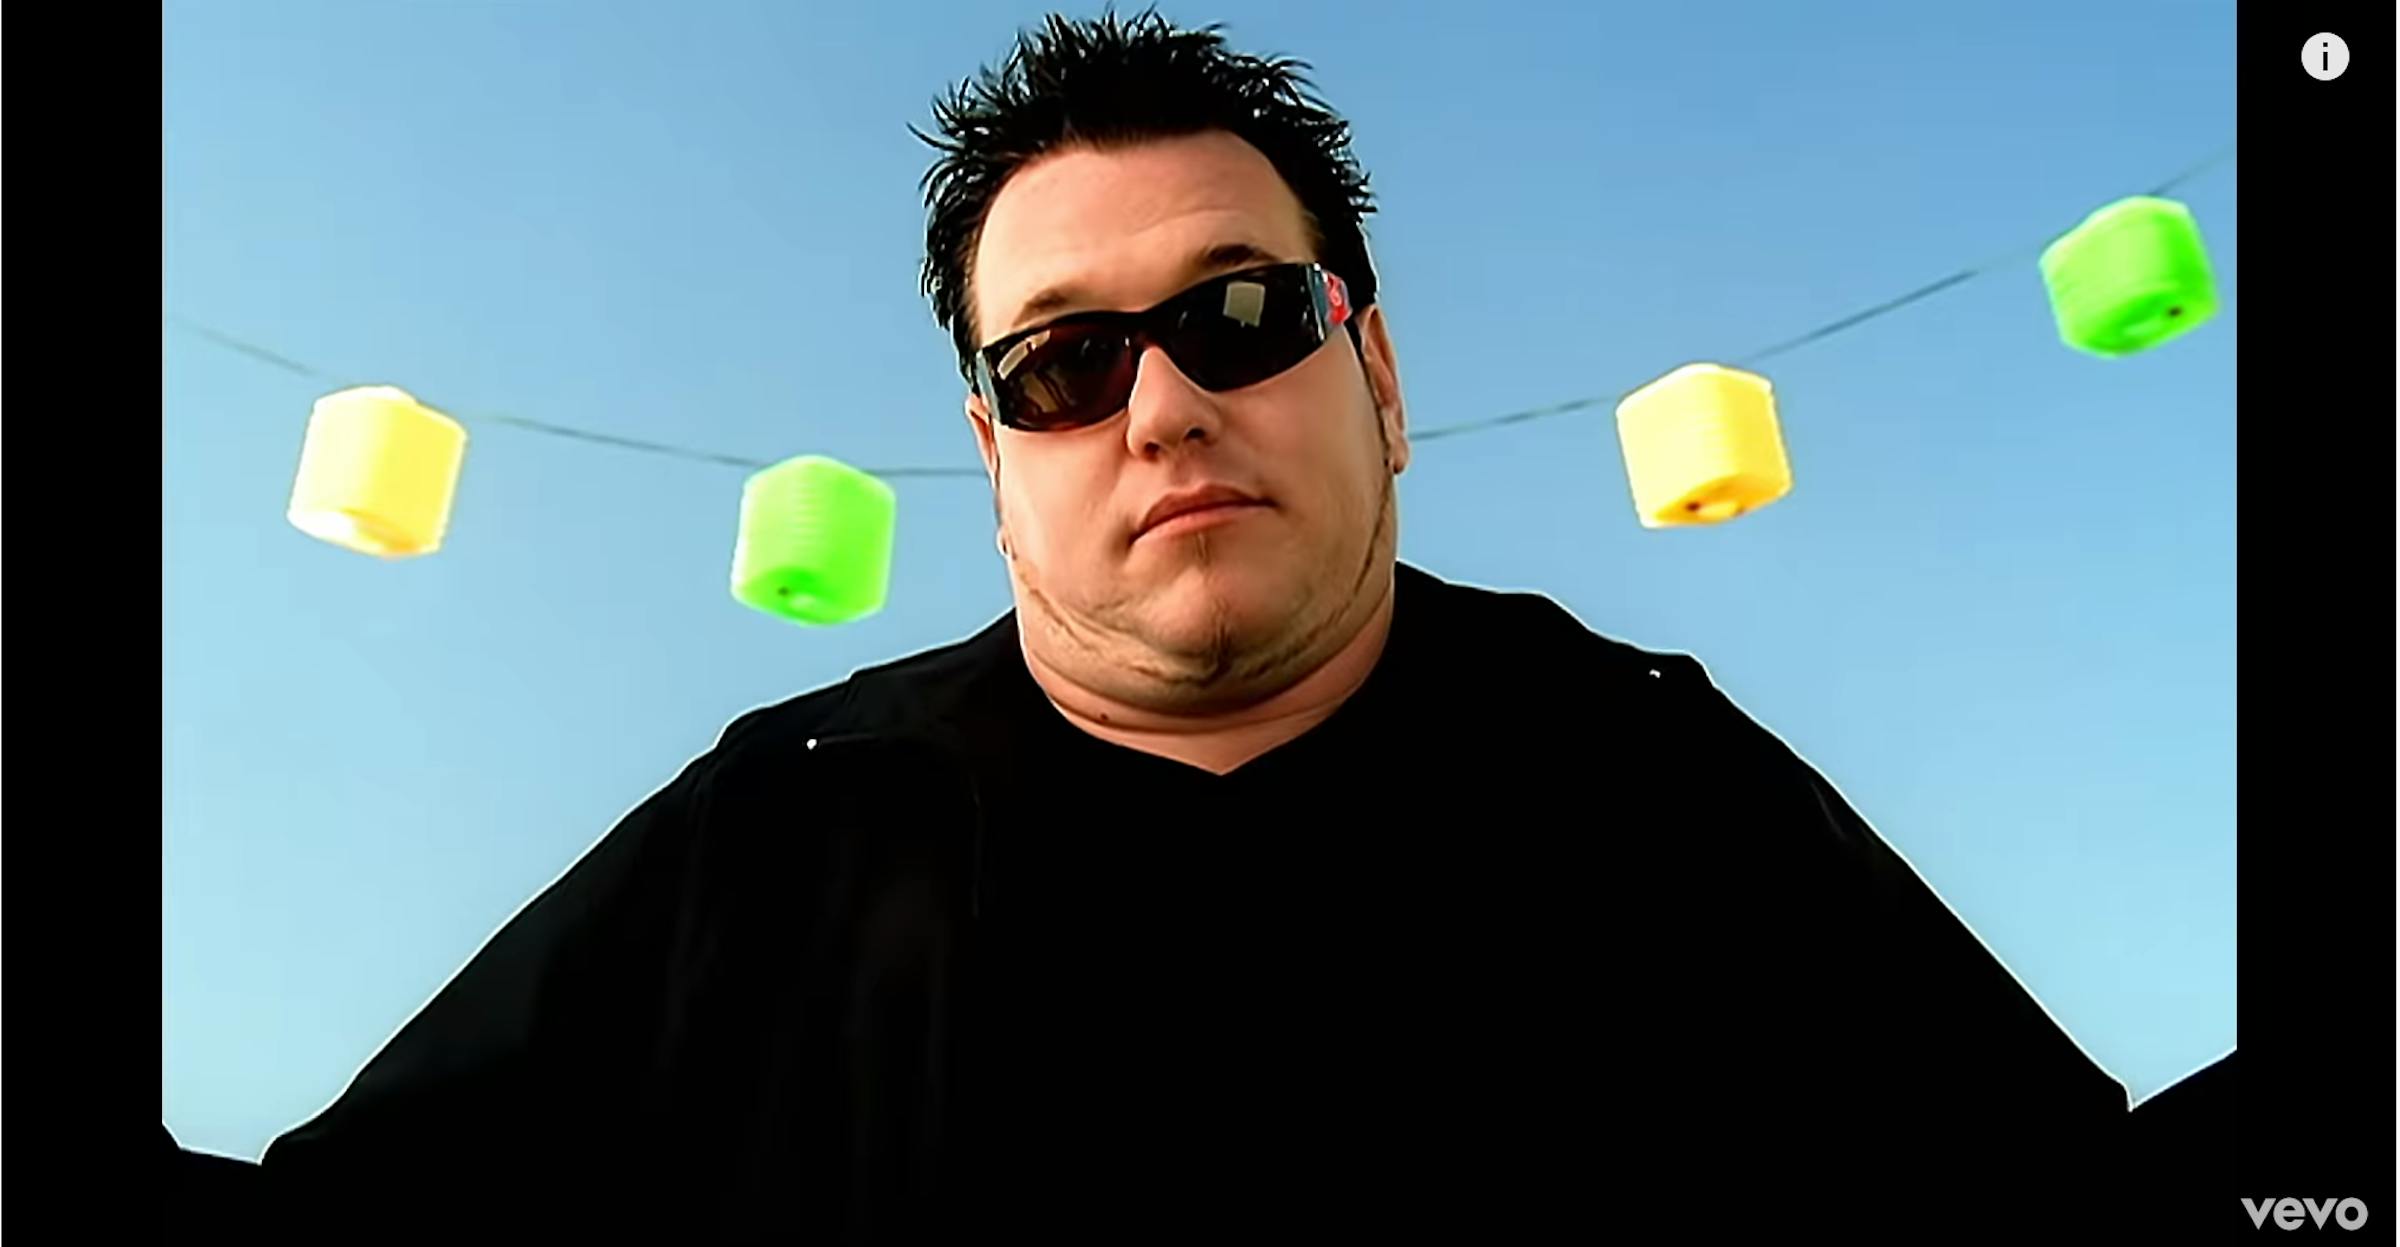 A Deep Dive Into The Video For All Star By Smash Mouth — Kerrang!